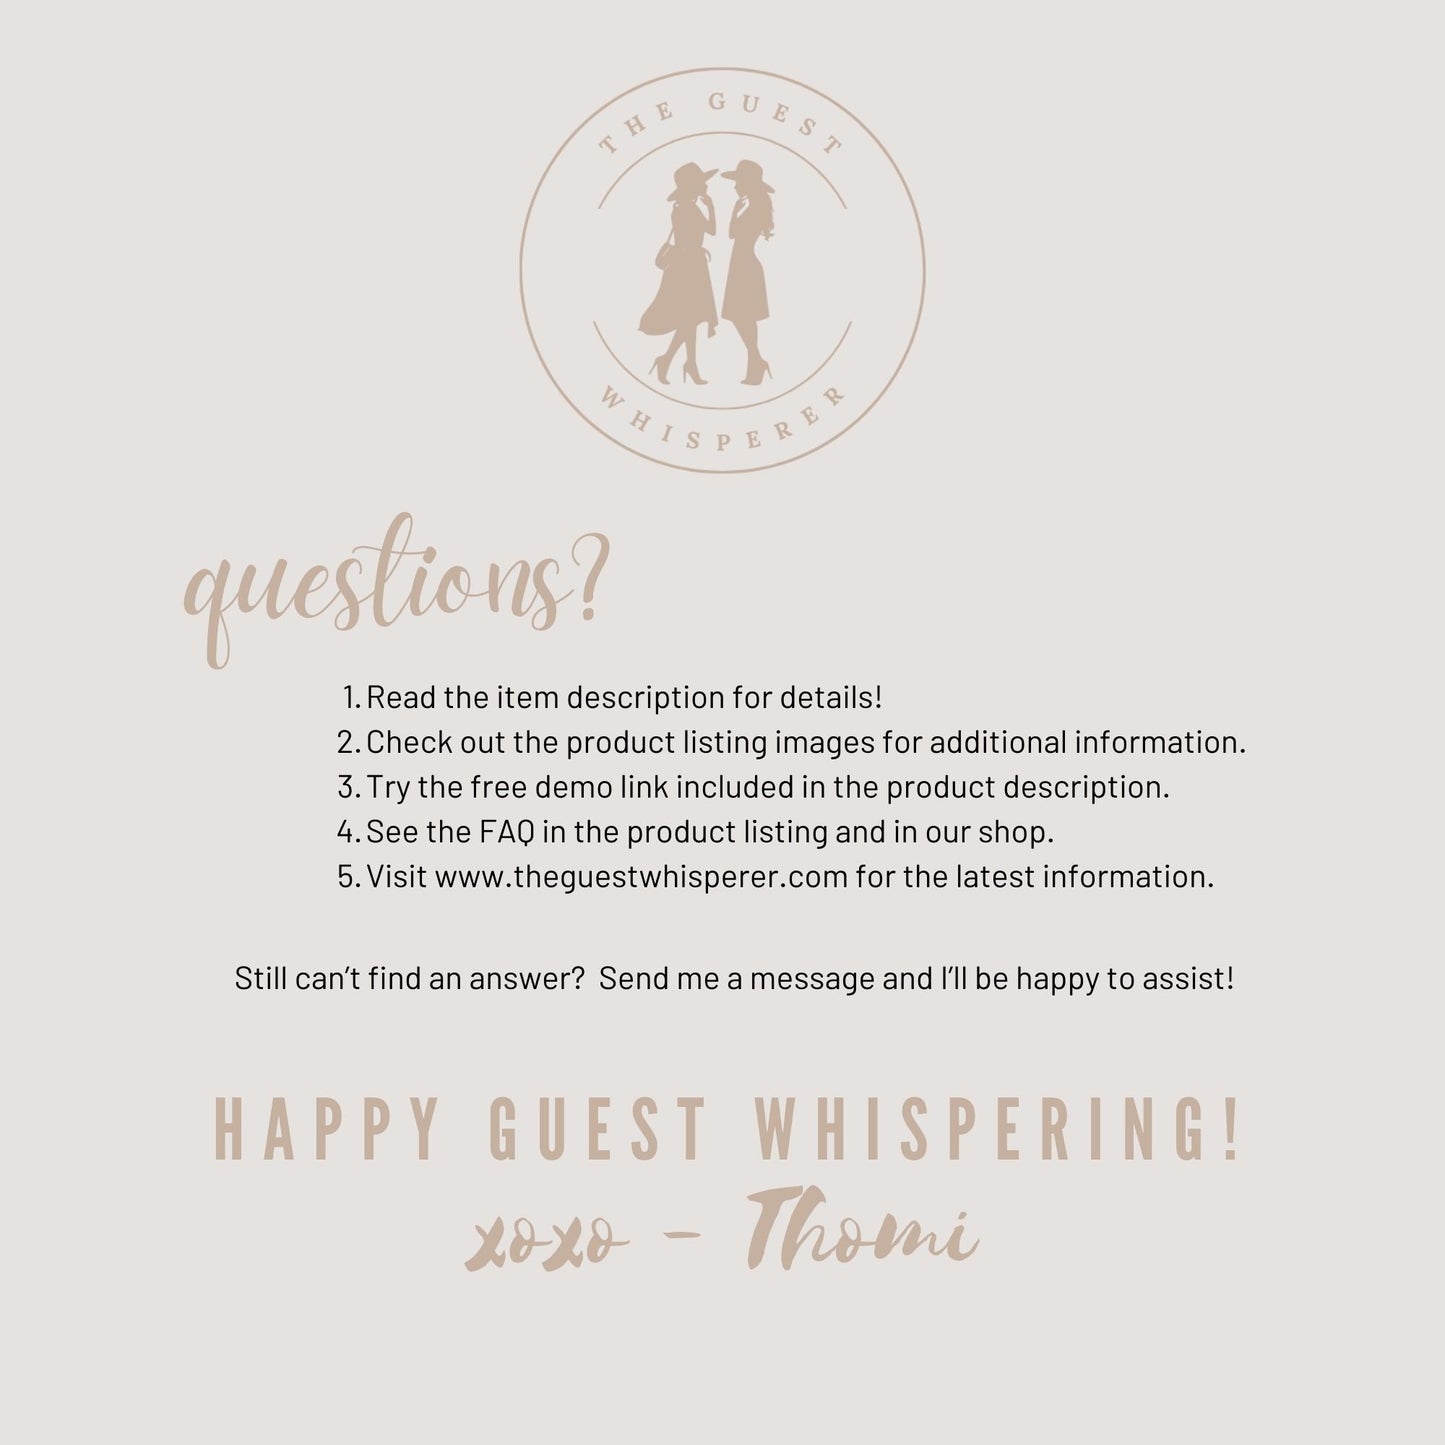 Bridesmaid Proposal with Infographic